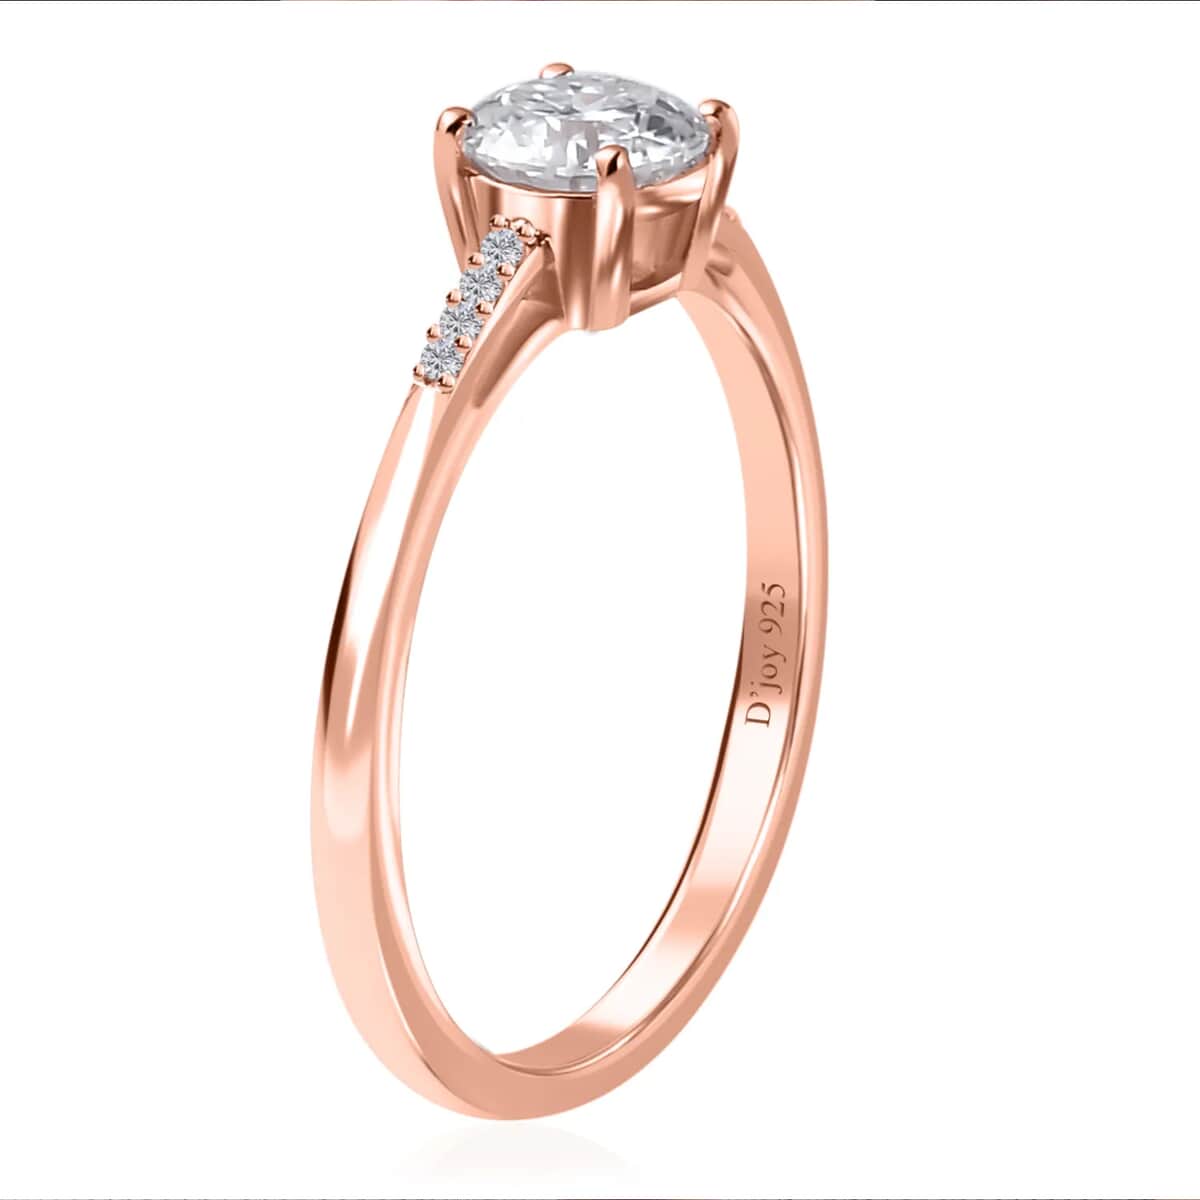 100 Facets Moissanite 1.65 ctw Solitaire Ring and Pendant Set in Vermeil Rose Gold Over Sterling Silver, Moissanite Solitaire Ring, Jewelry Set For Her (Size 6.00) image number 4